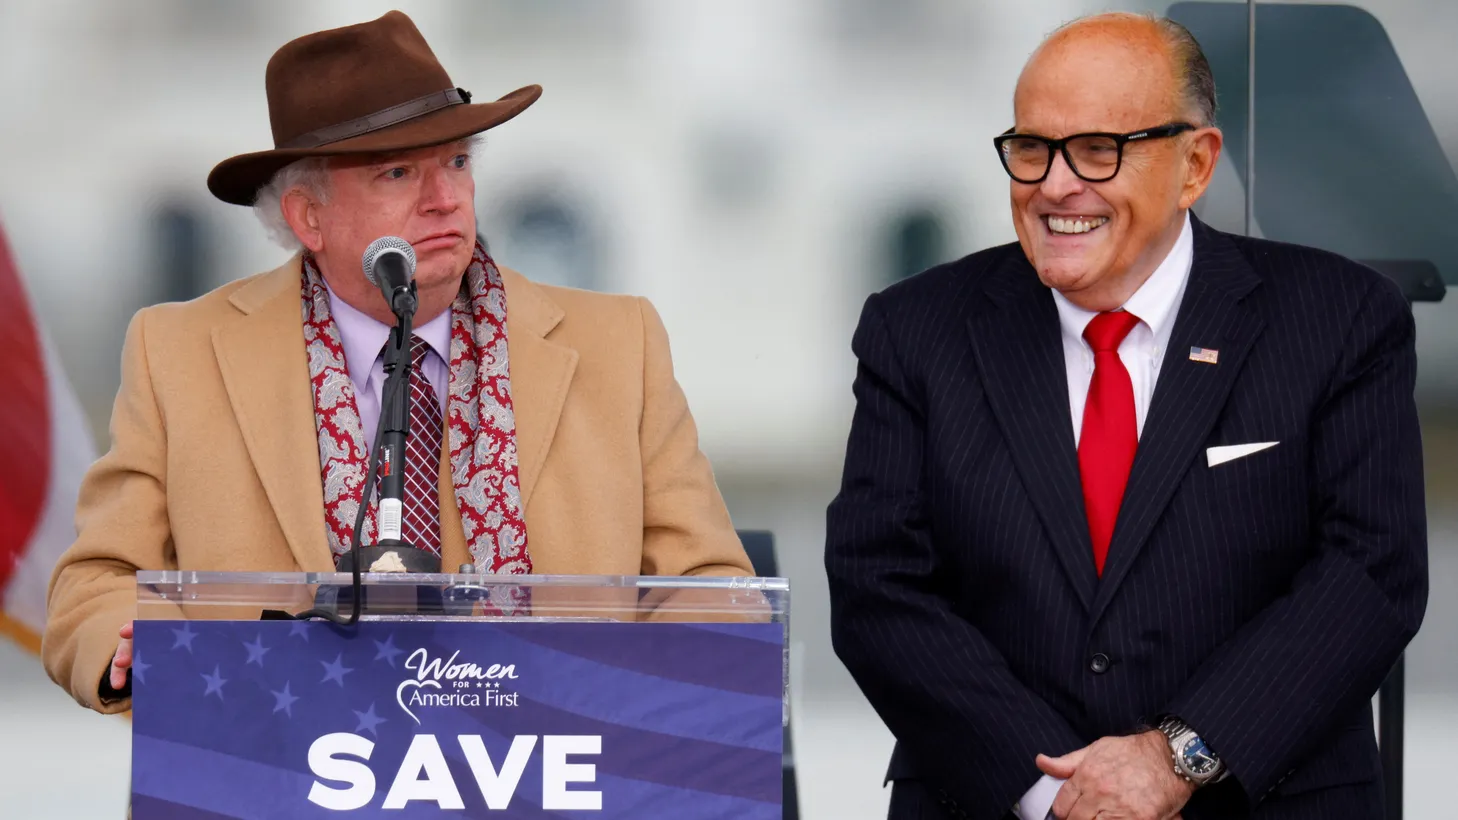 Attorney John Eastman speaks next to U.S. President Donald Trump's personal attorney Rudy Giuliani, as Trump supporters gather ahead of the president’s speech to contest the certification of the results of the 2020 U.S. presidential election on the Ellipse in Washington, U.S, January 6, 2021.